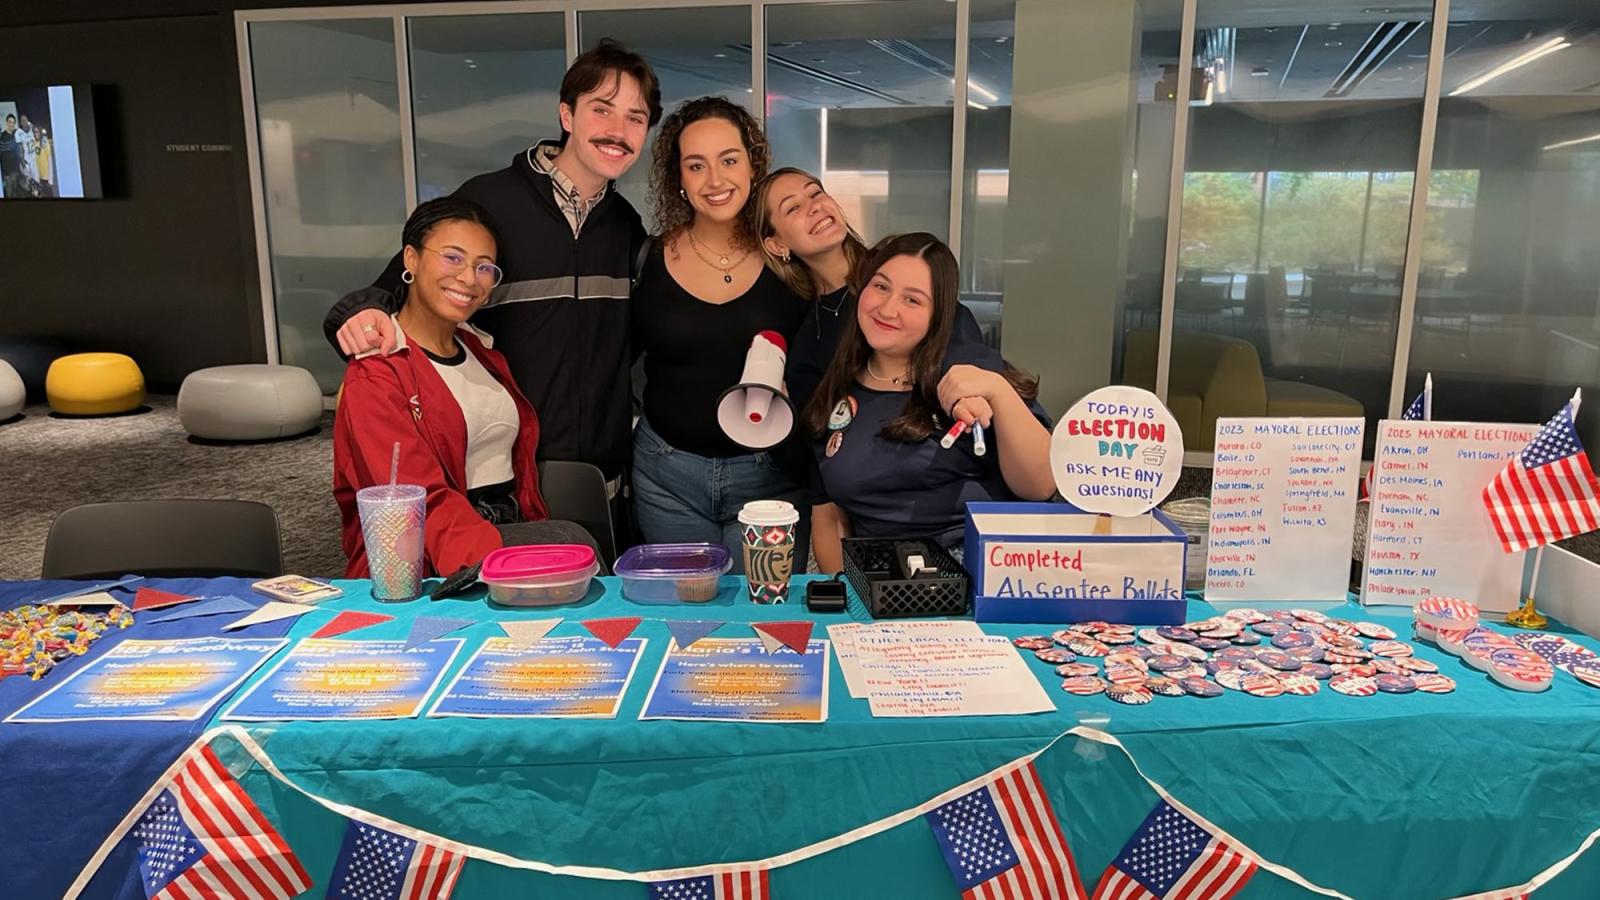 Pace students tabling to get students to register to vote